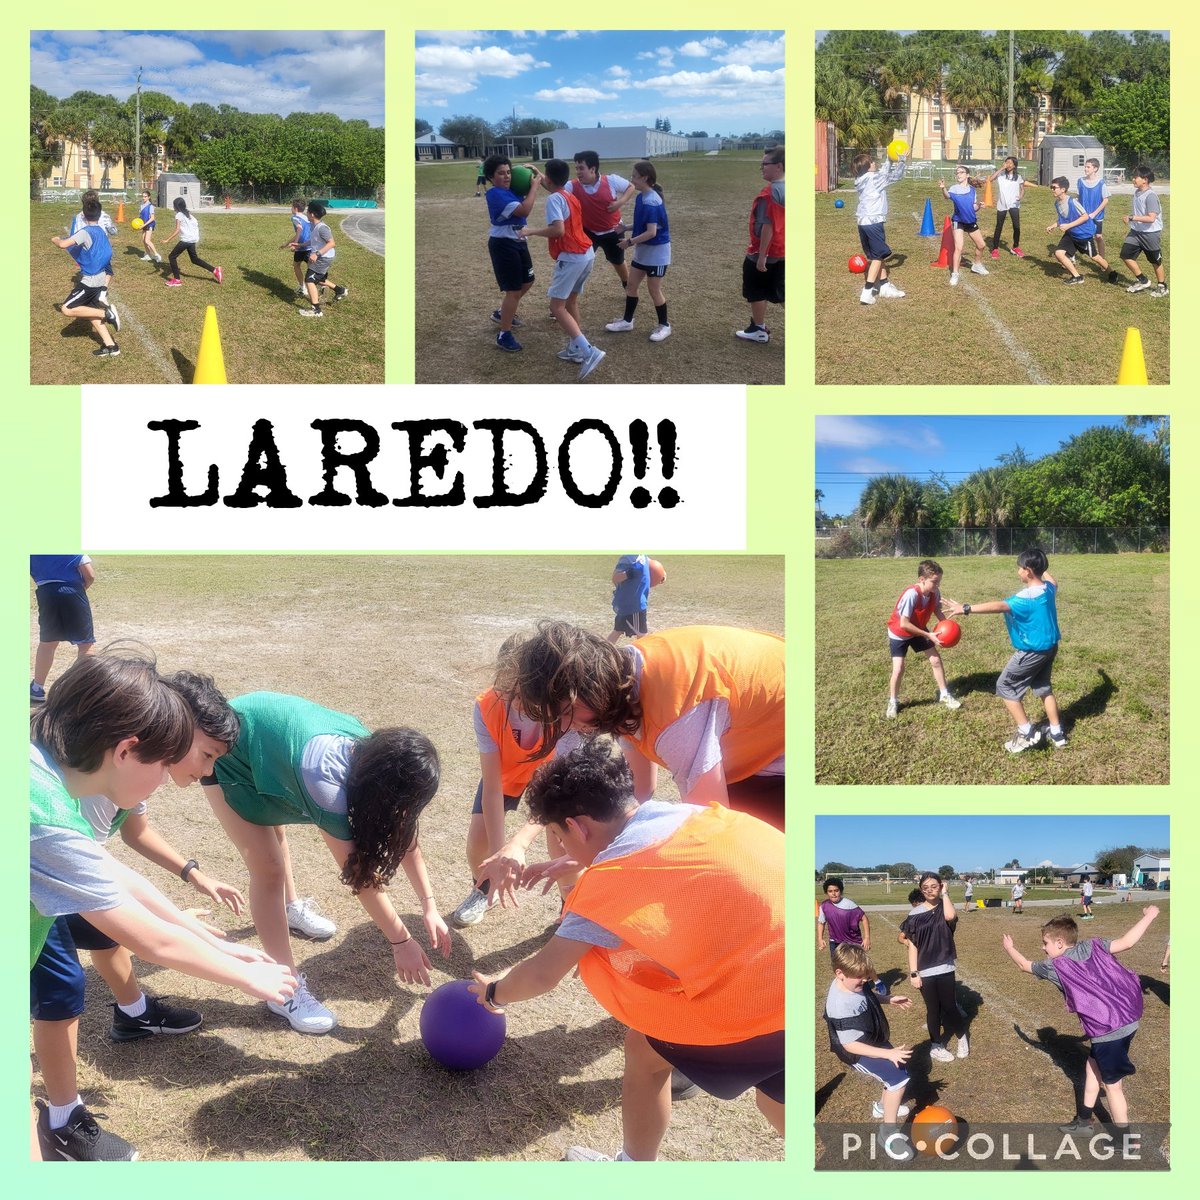 Laredo, a fast action game, where ALL Ss are engaged. SS work on fundamental skills like finding open space, underhand toss/catch, defense, game strategy, & of course teamwork & fun. @CMMSPrincipal @CmmsMedia @aschneider36 @SHAPE_Florida #cmmspe #activekids #ShiningStarPBC